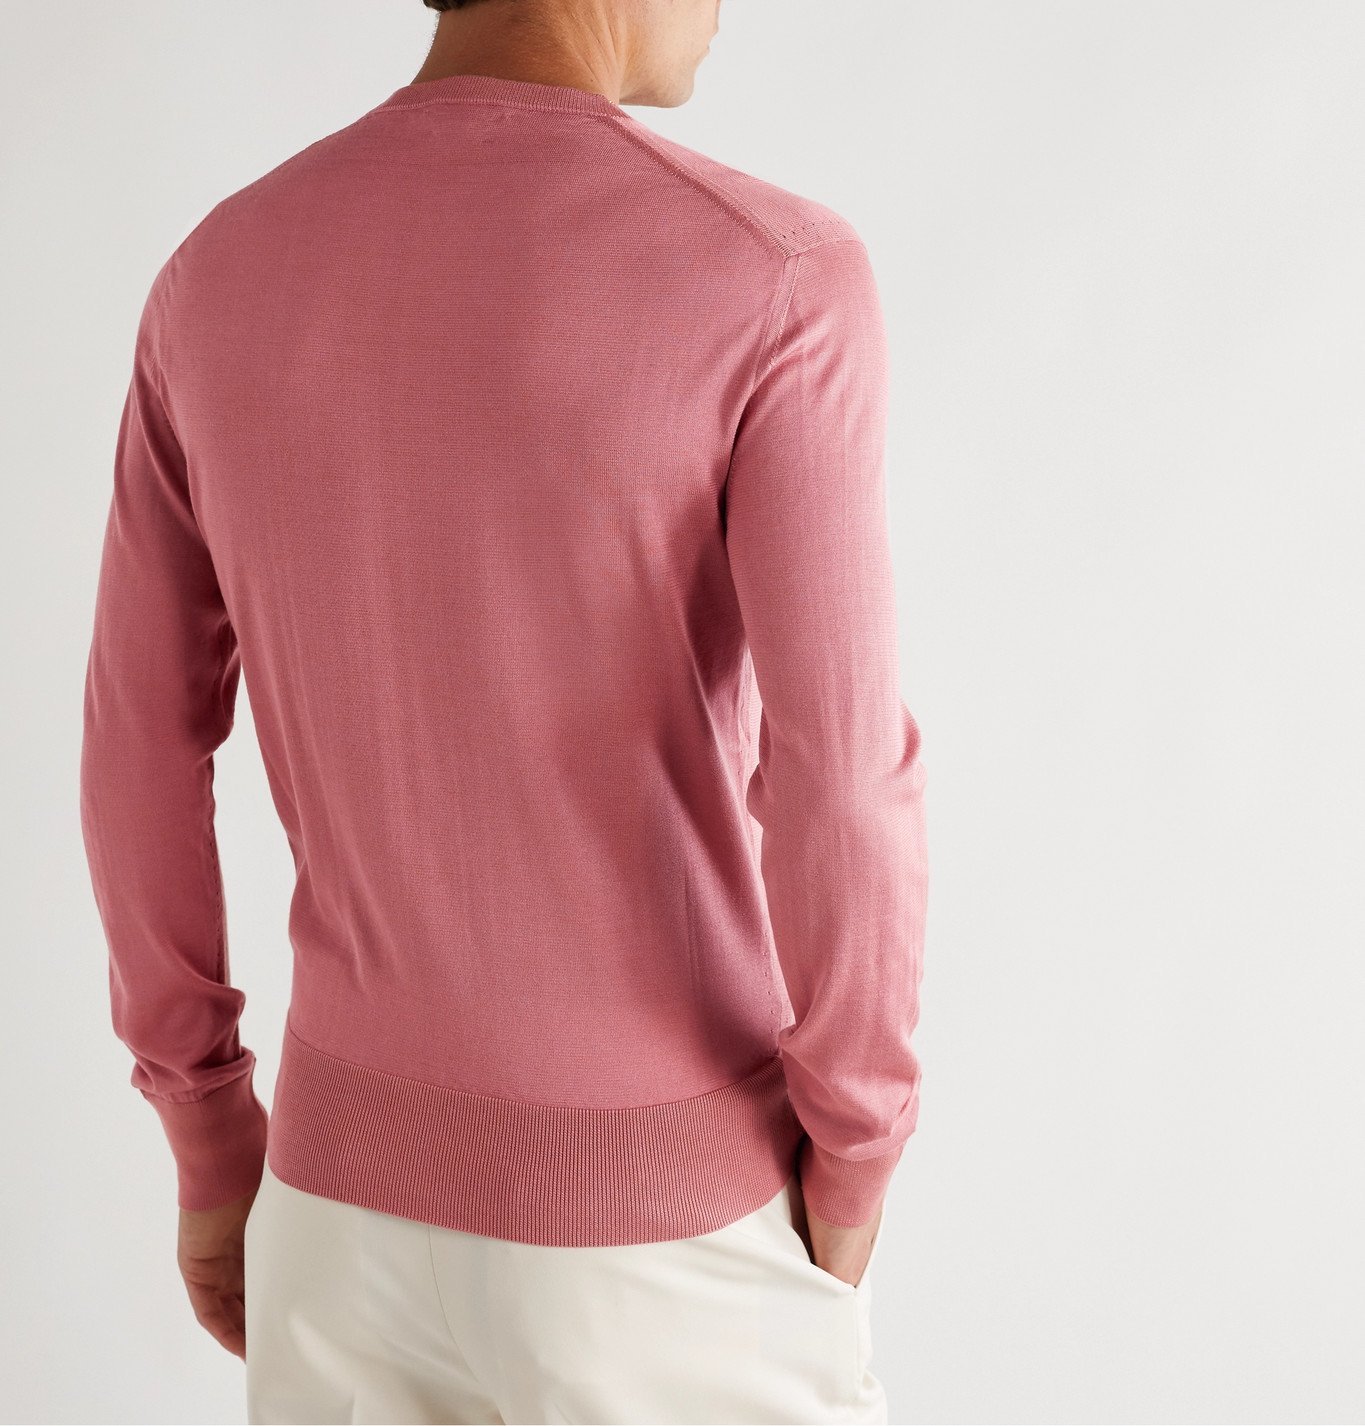 TOM FORD - Slim-Fit Silk Sweater - Pink TOM FORD